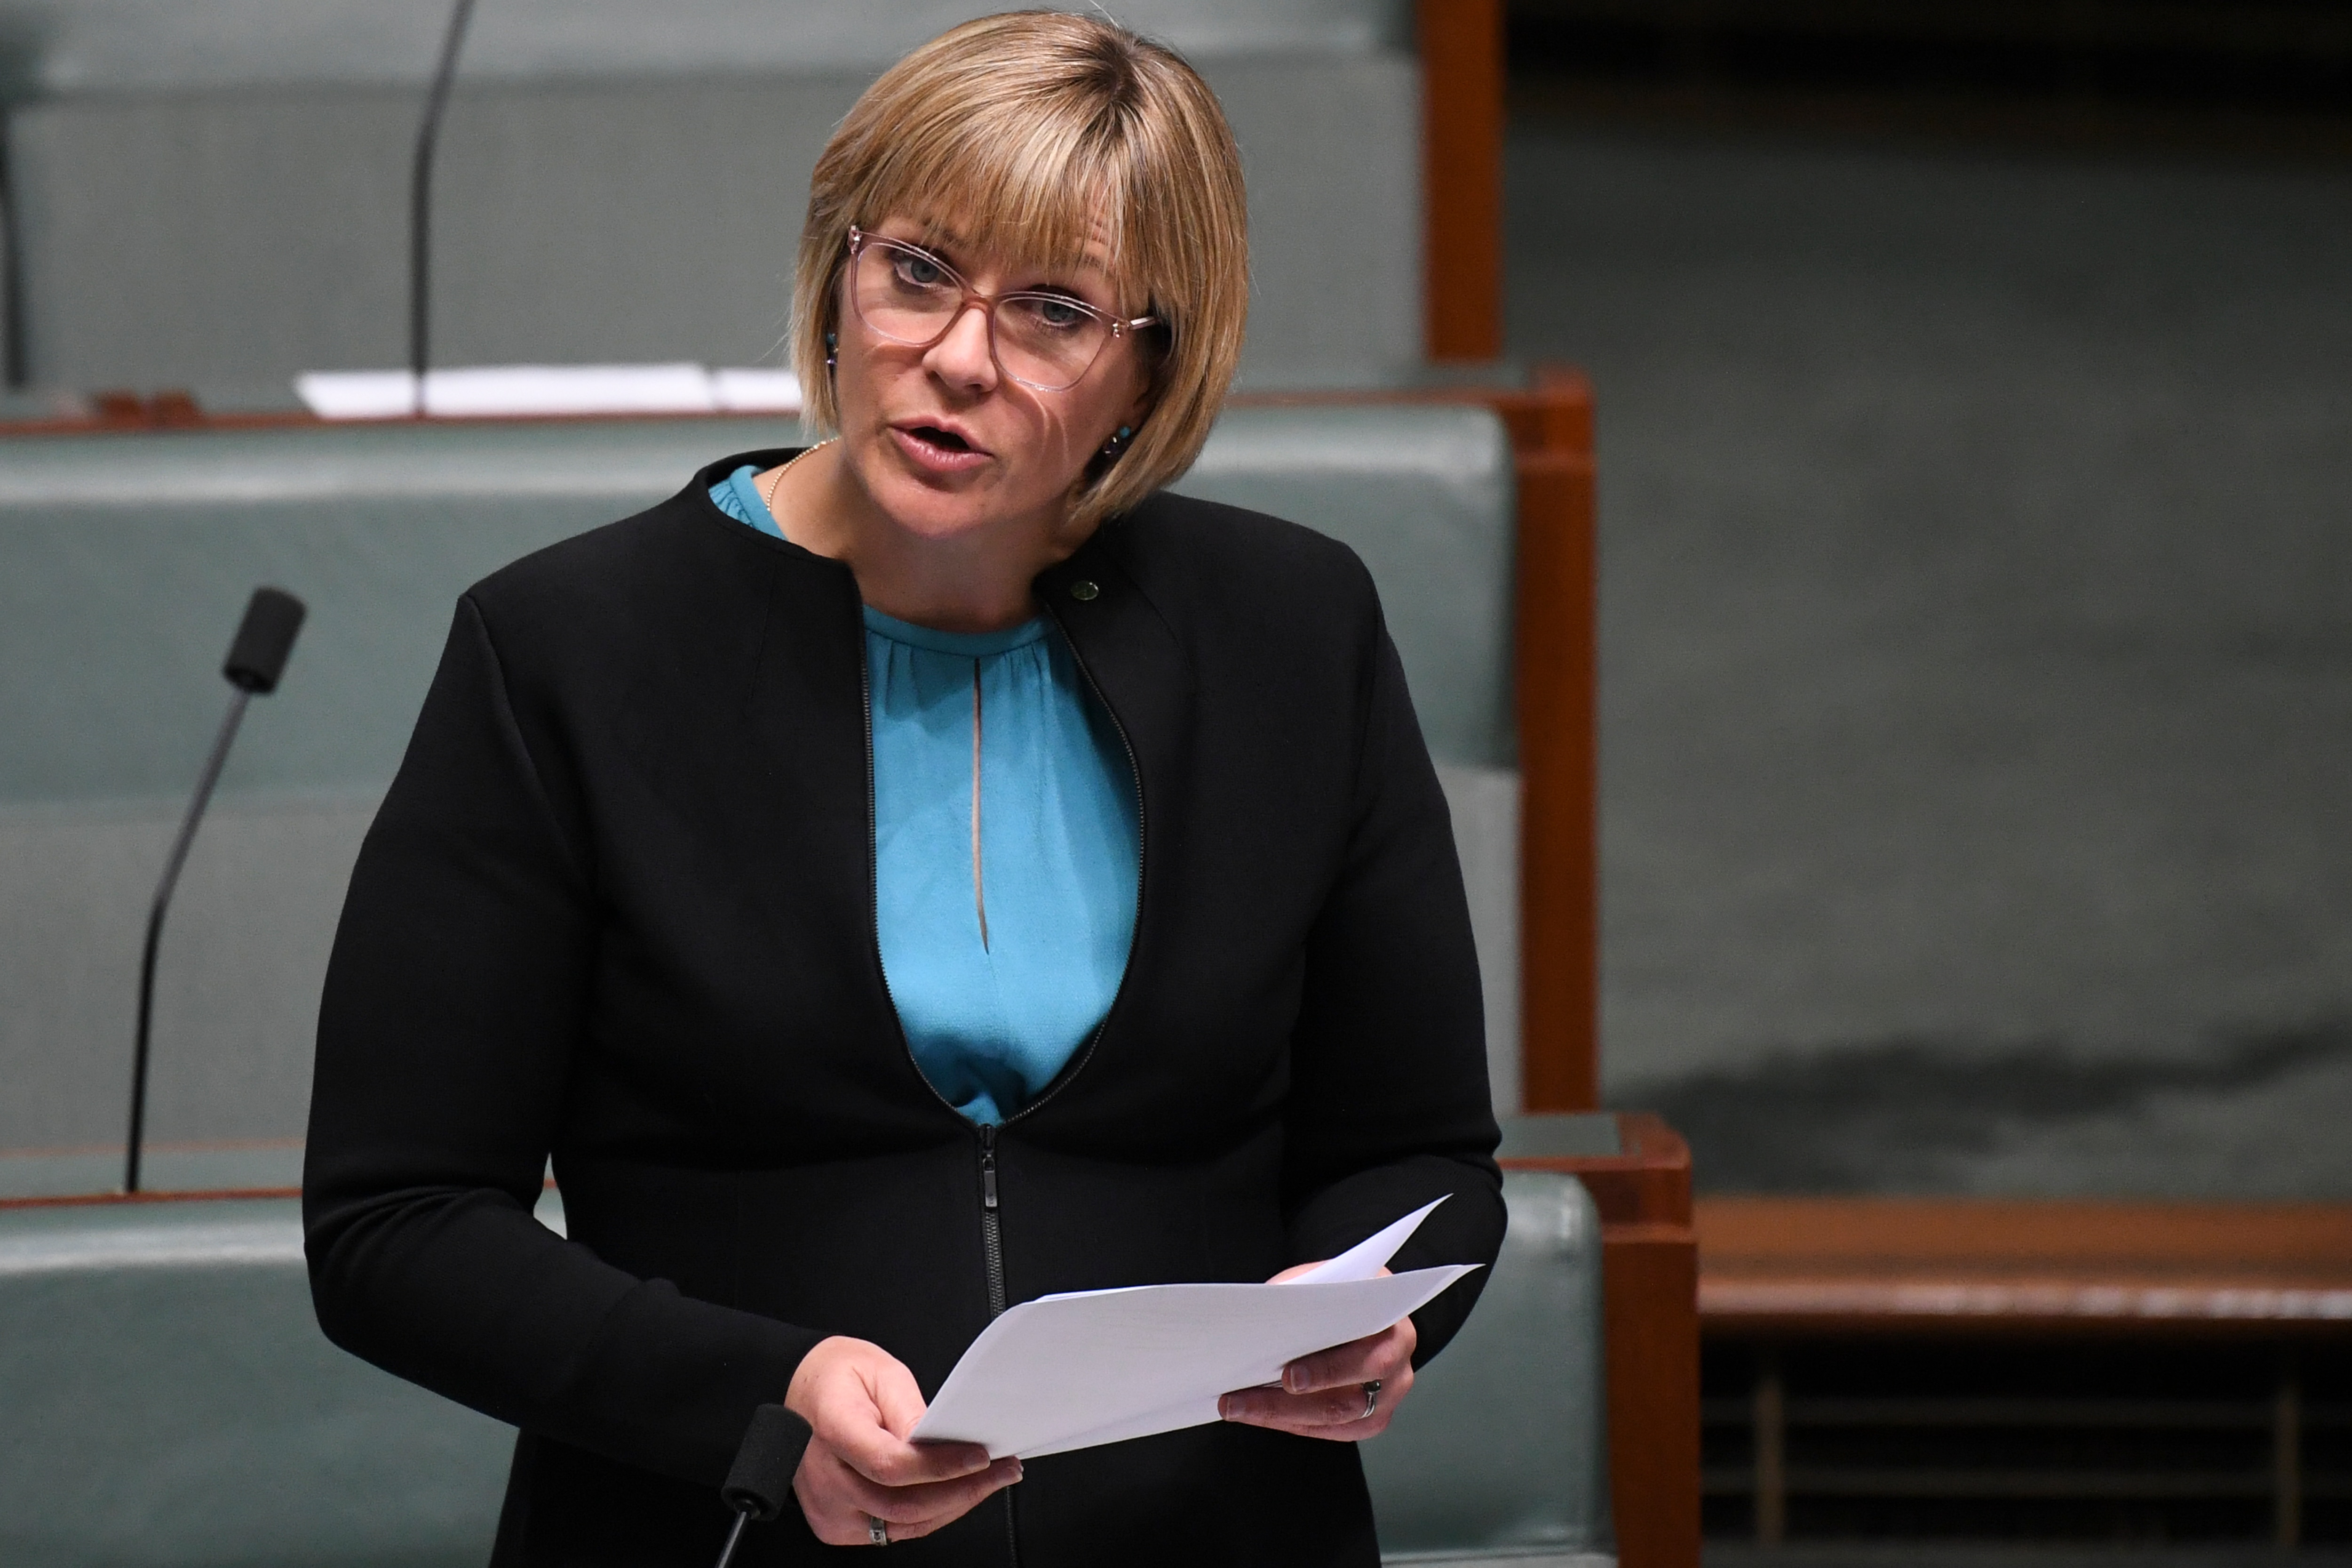 Independent MP Zali Steggall speaks in the House of Representatives at Parliament House in Canberra.